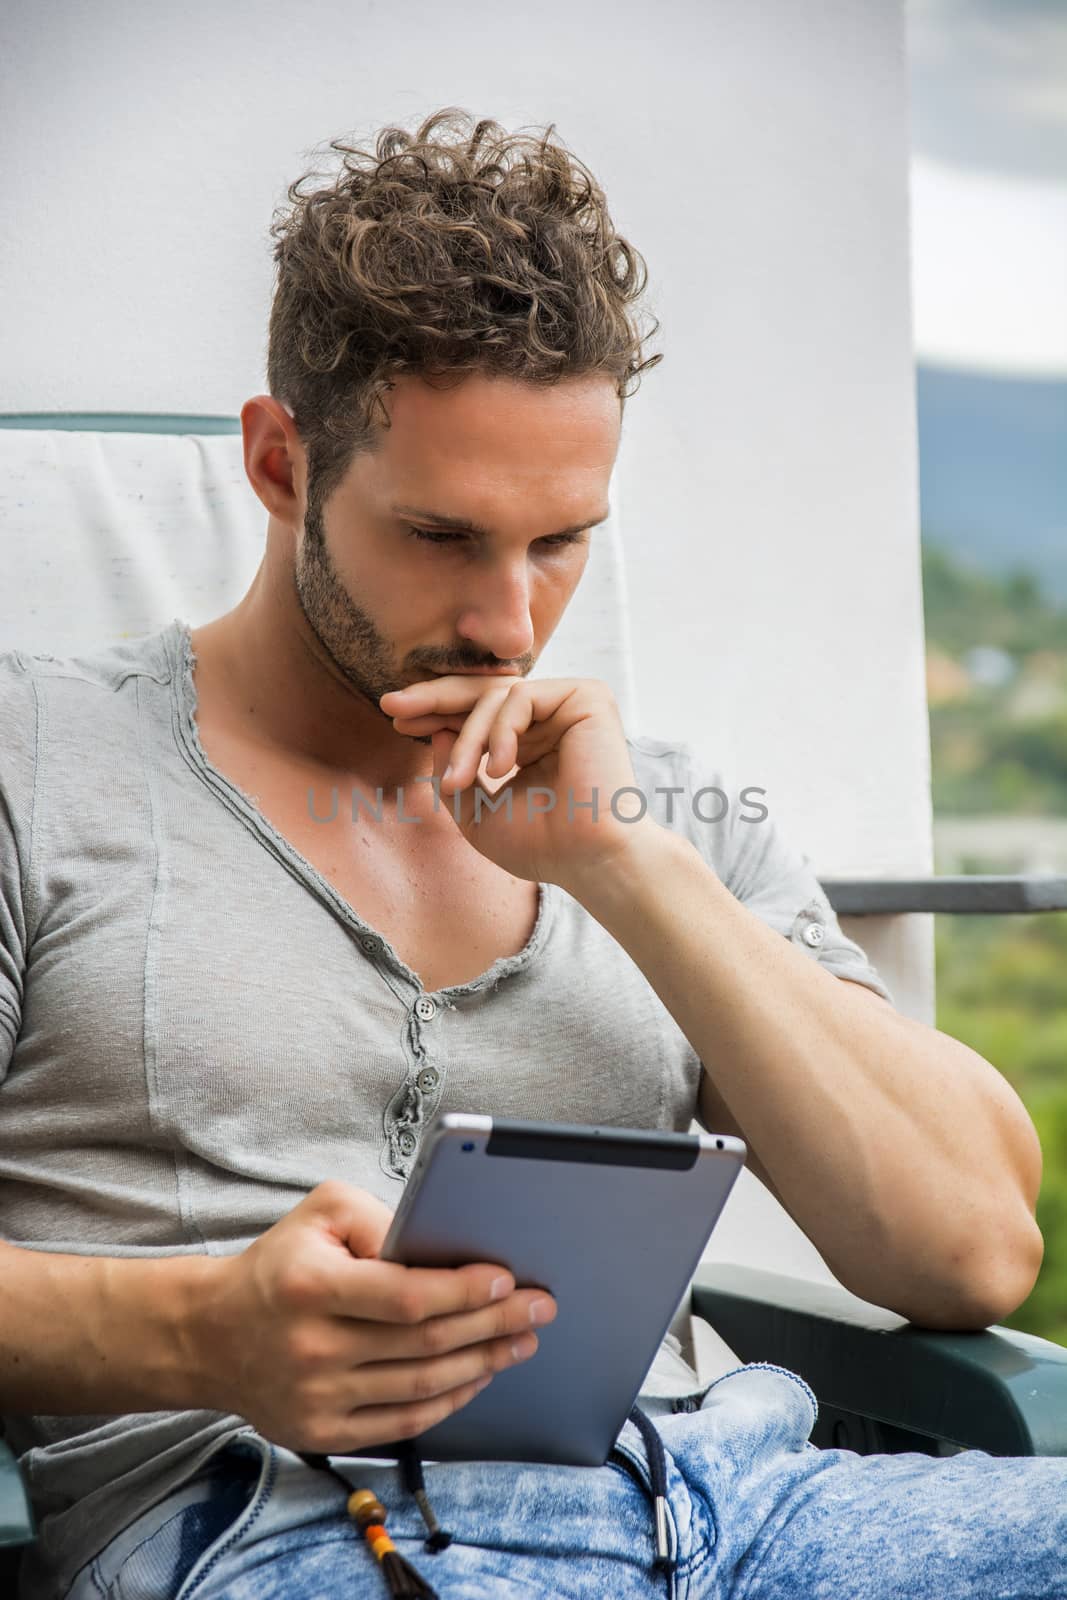 Handsome trendy man wearing t-shirt sitting and working, looking down at a tablet computer that he is holding, outdoor on house terrace